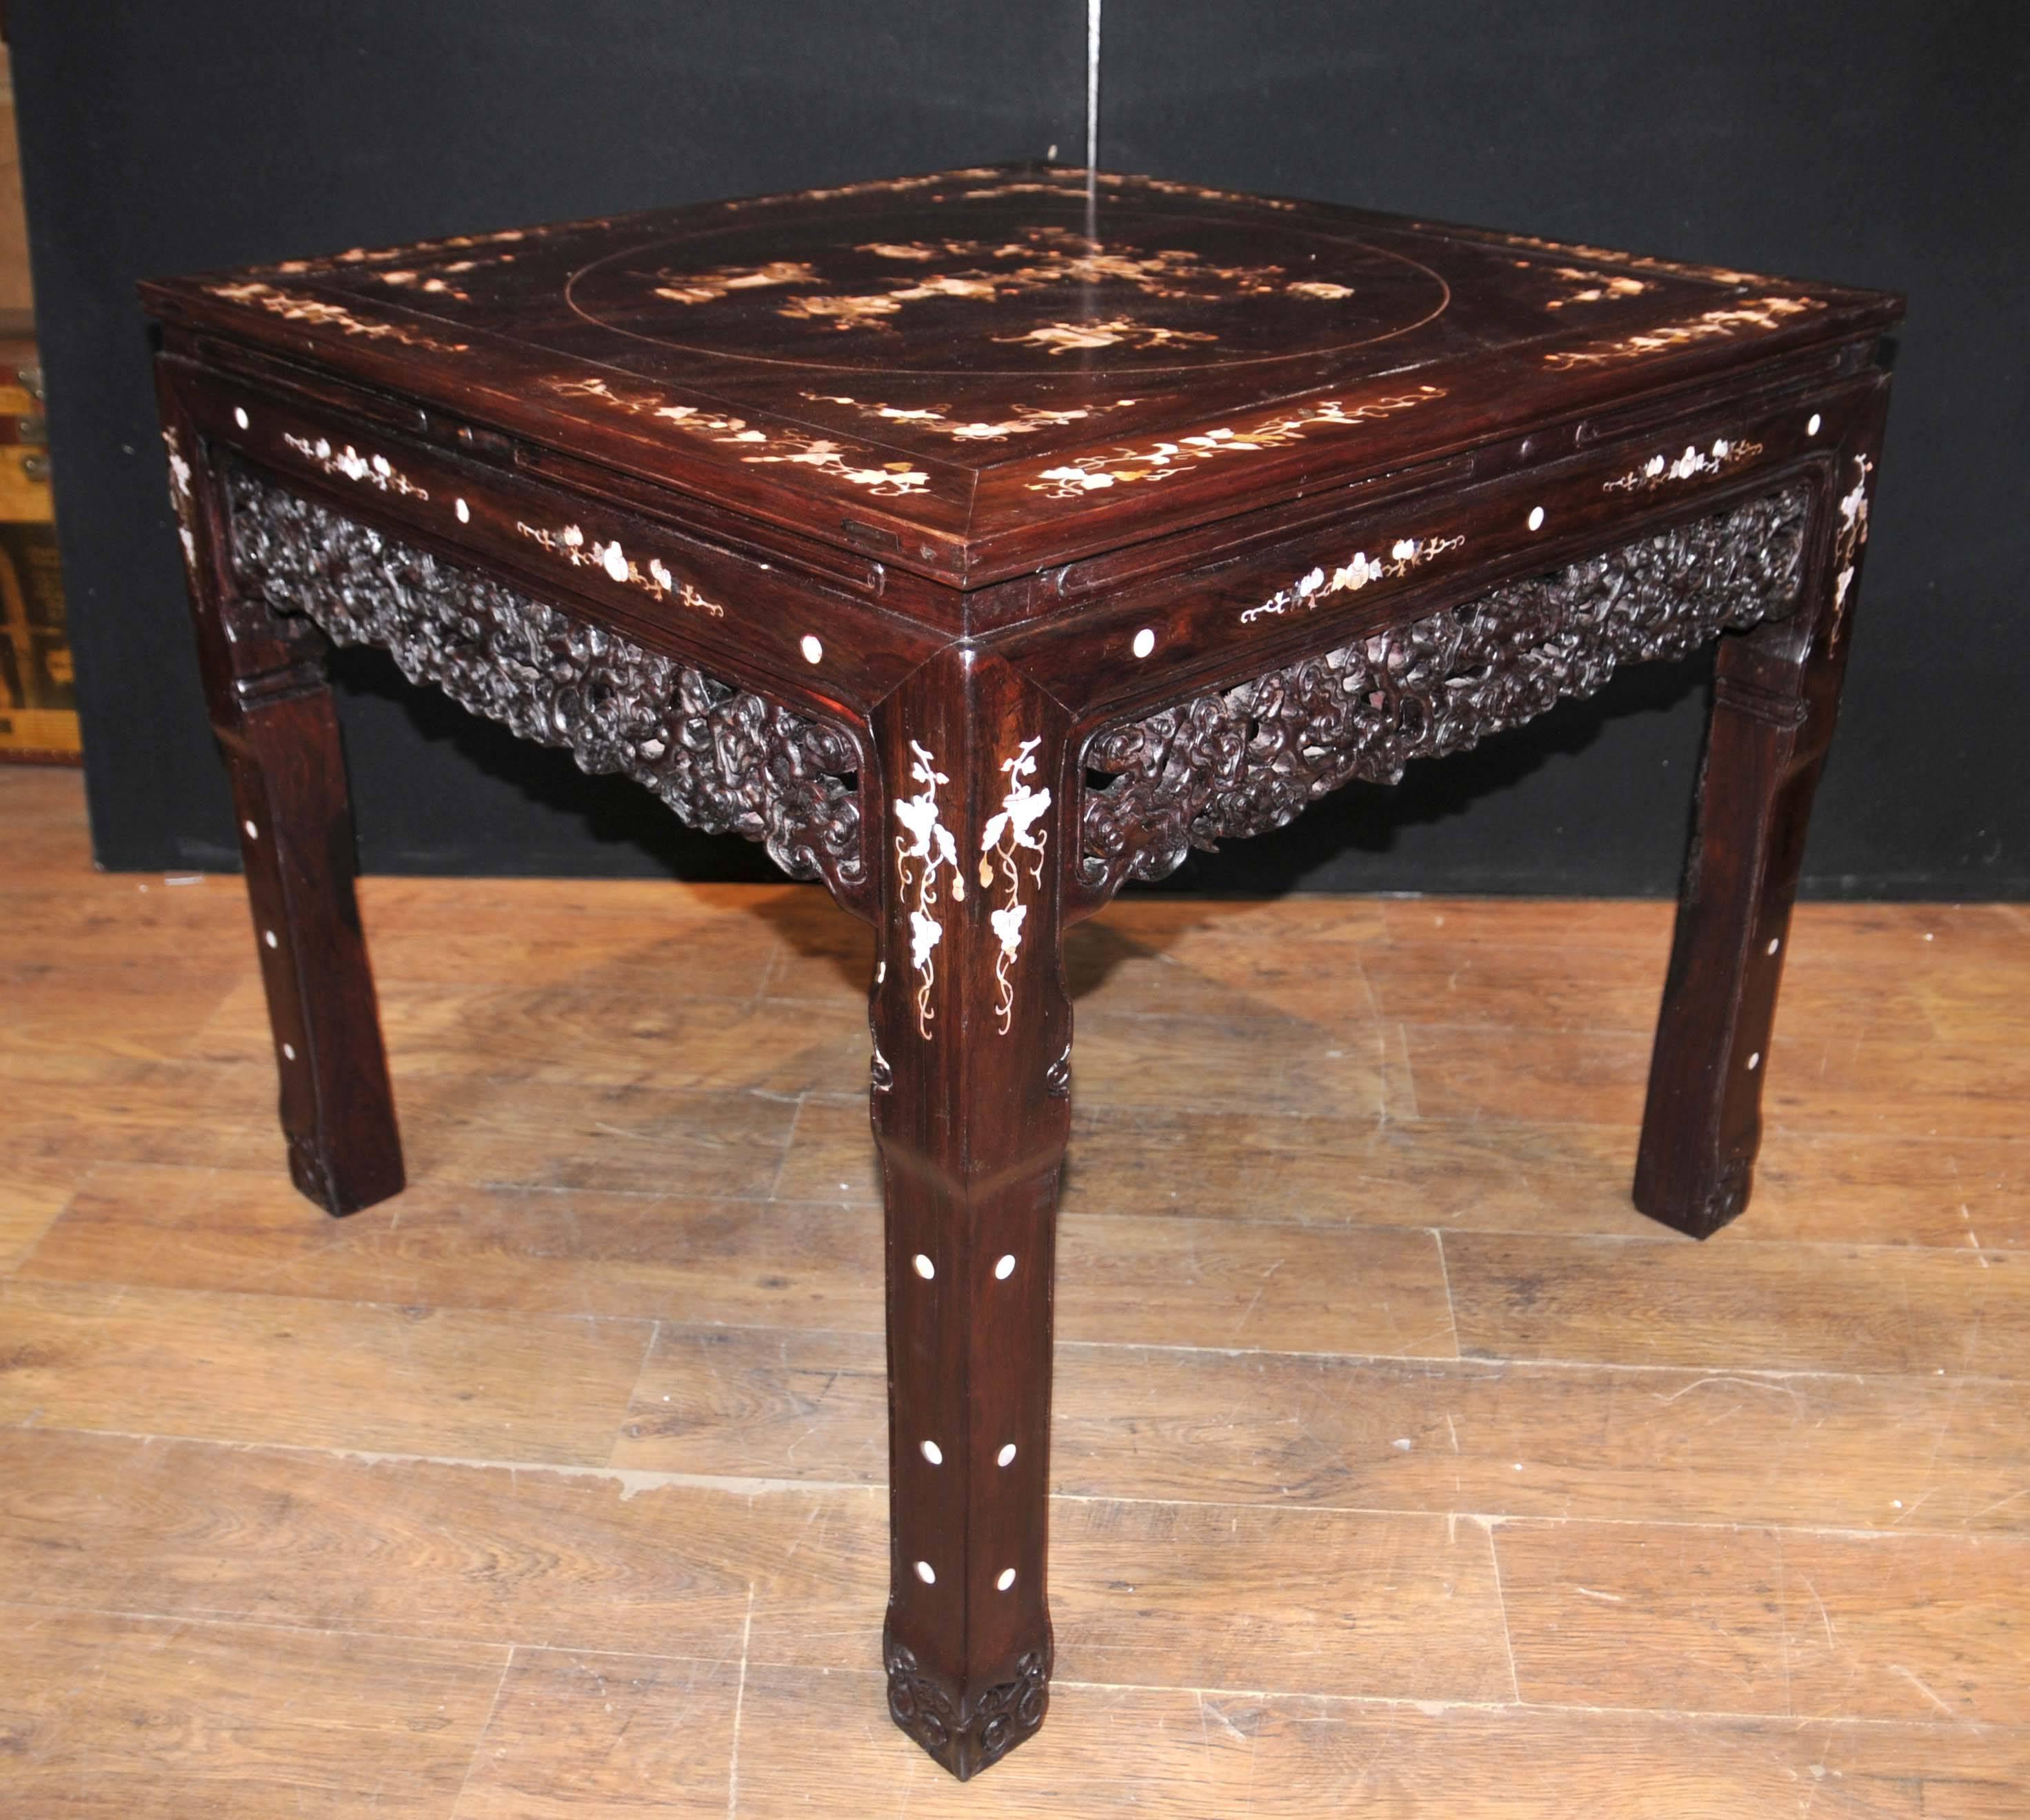 Chinese Export Chinese Antique Hardwood Table and Stool Dining Set Mother-of-Pearl Inlay